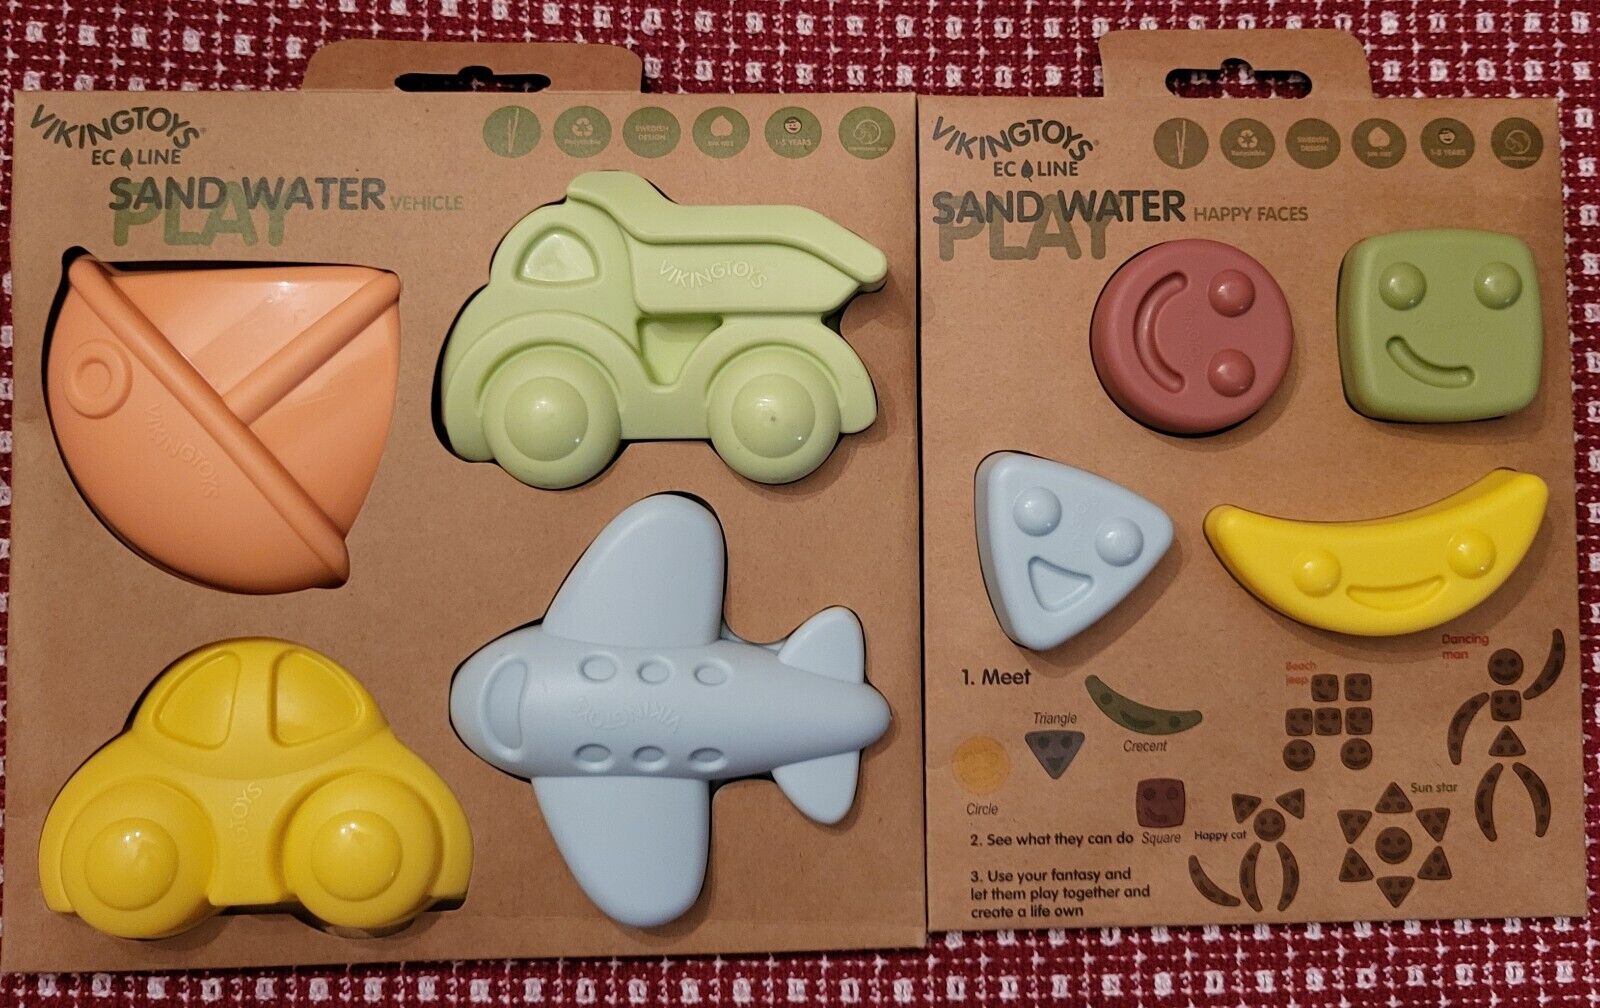 Viking Toys Sweden Ecoline Sand and Water 8 Play Forms Molds New Eco Friendly